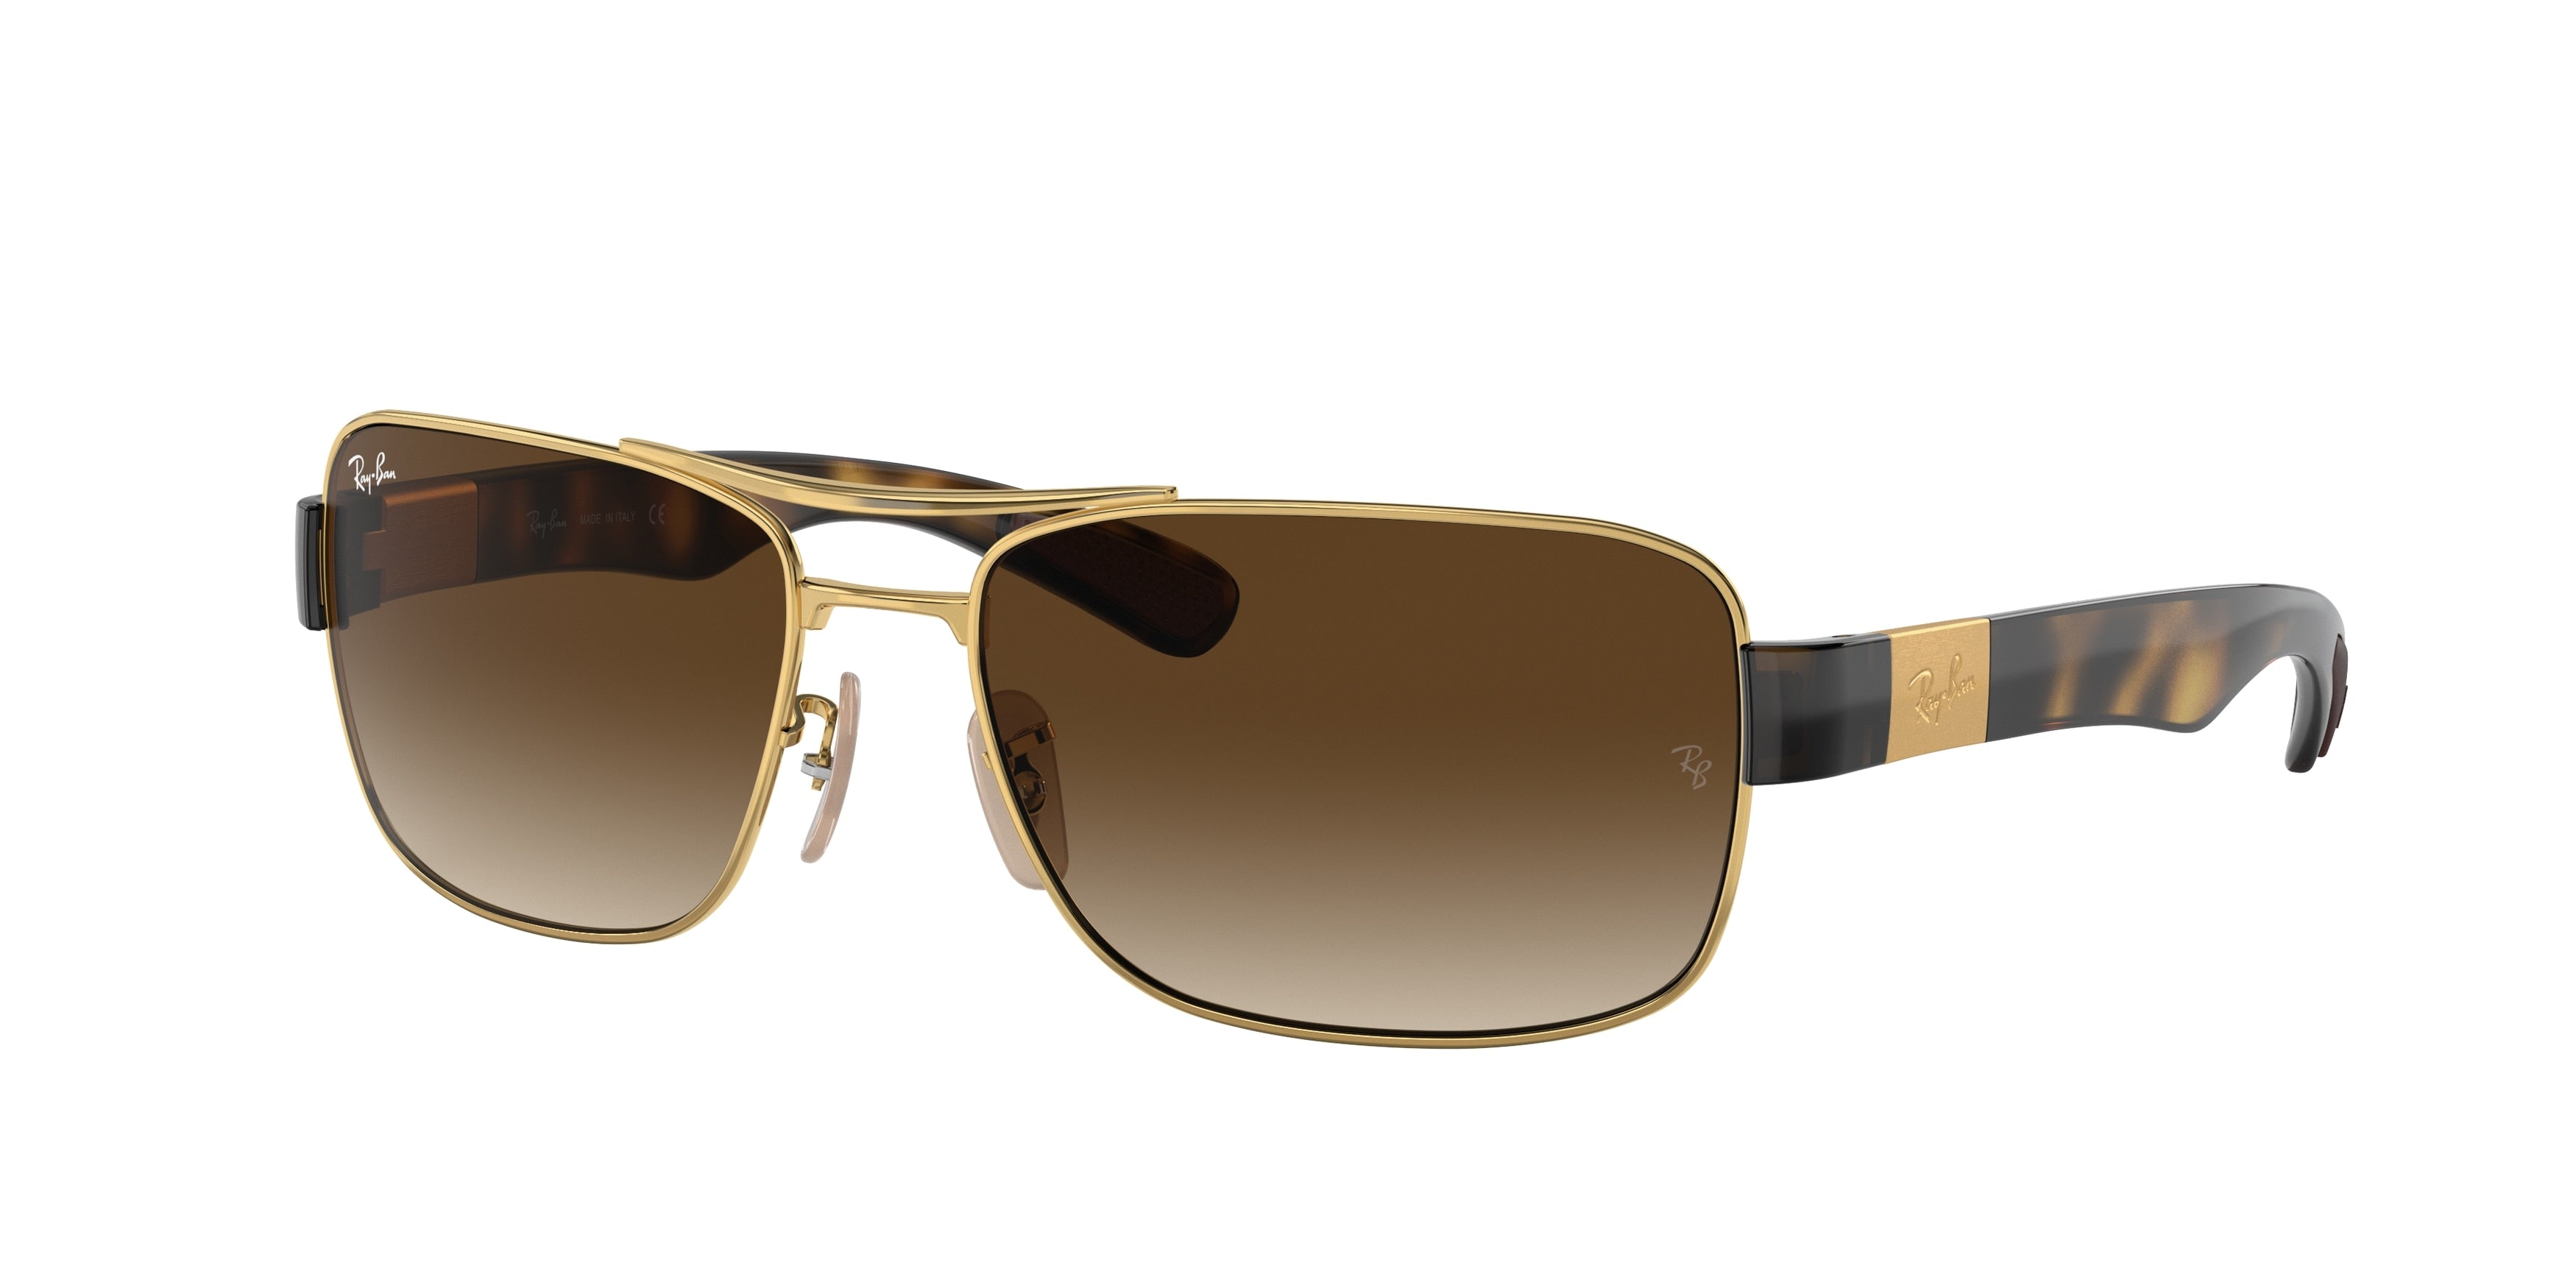 Ray-Ban RB3522 Square Sunglasses  001/13-Gold 64-135-17 - Color Map Gold